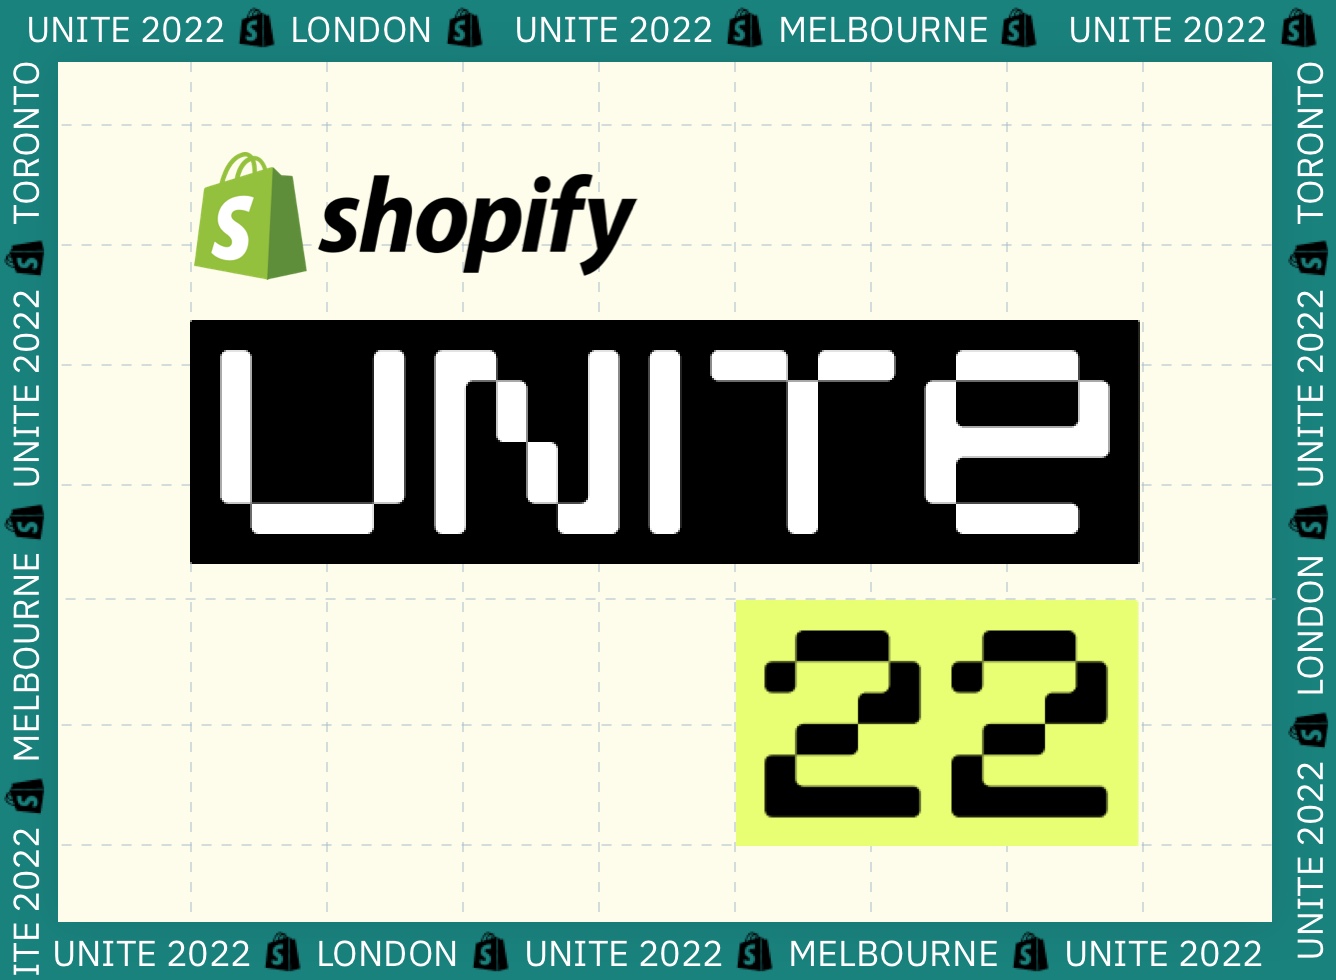 Take a Glimpse into the Future of eCommerce with Shopify Unite 2022